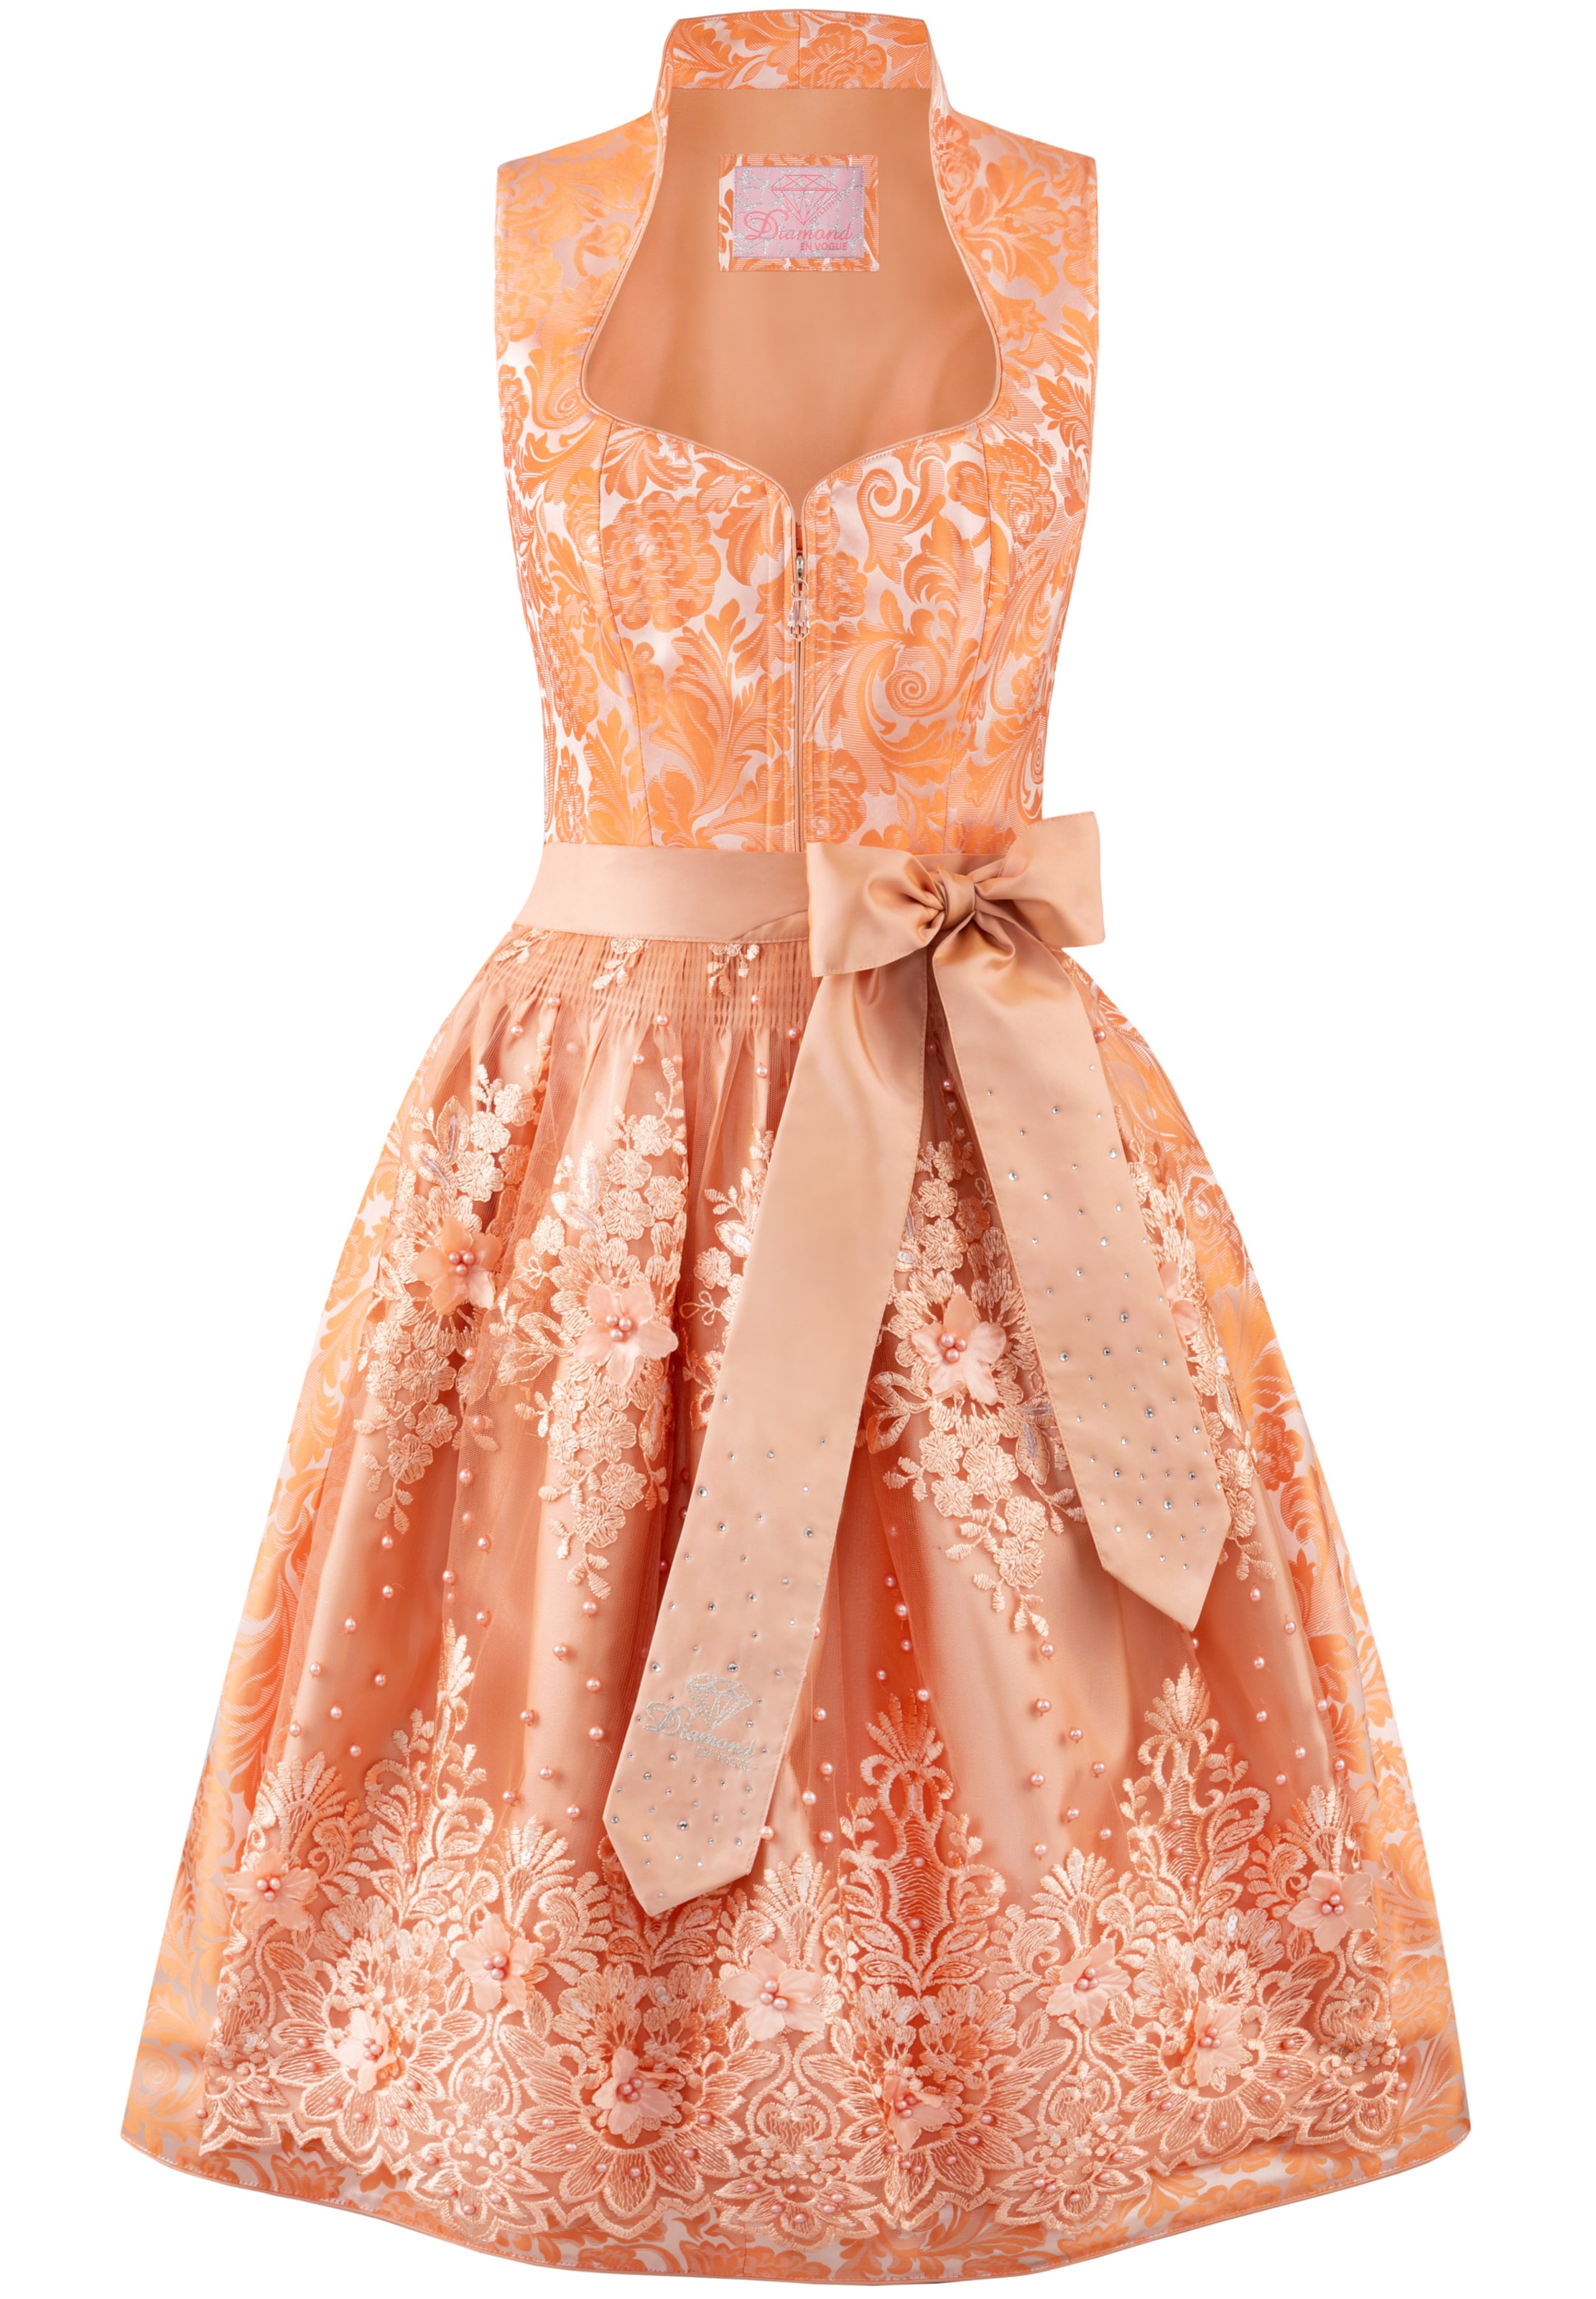 STOCKERPOINT Dirndl Fabrina in Apricot, Lachs 